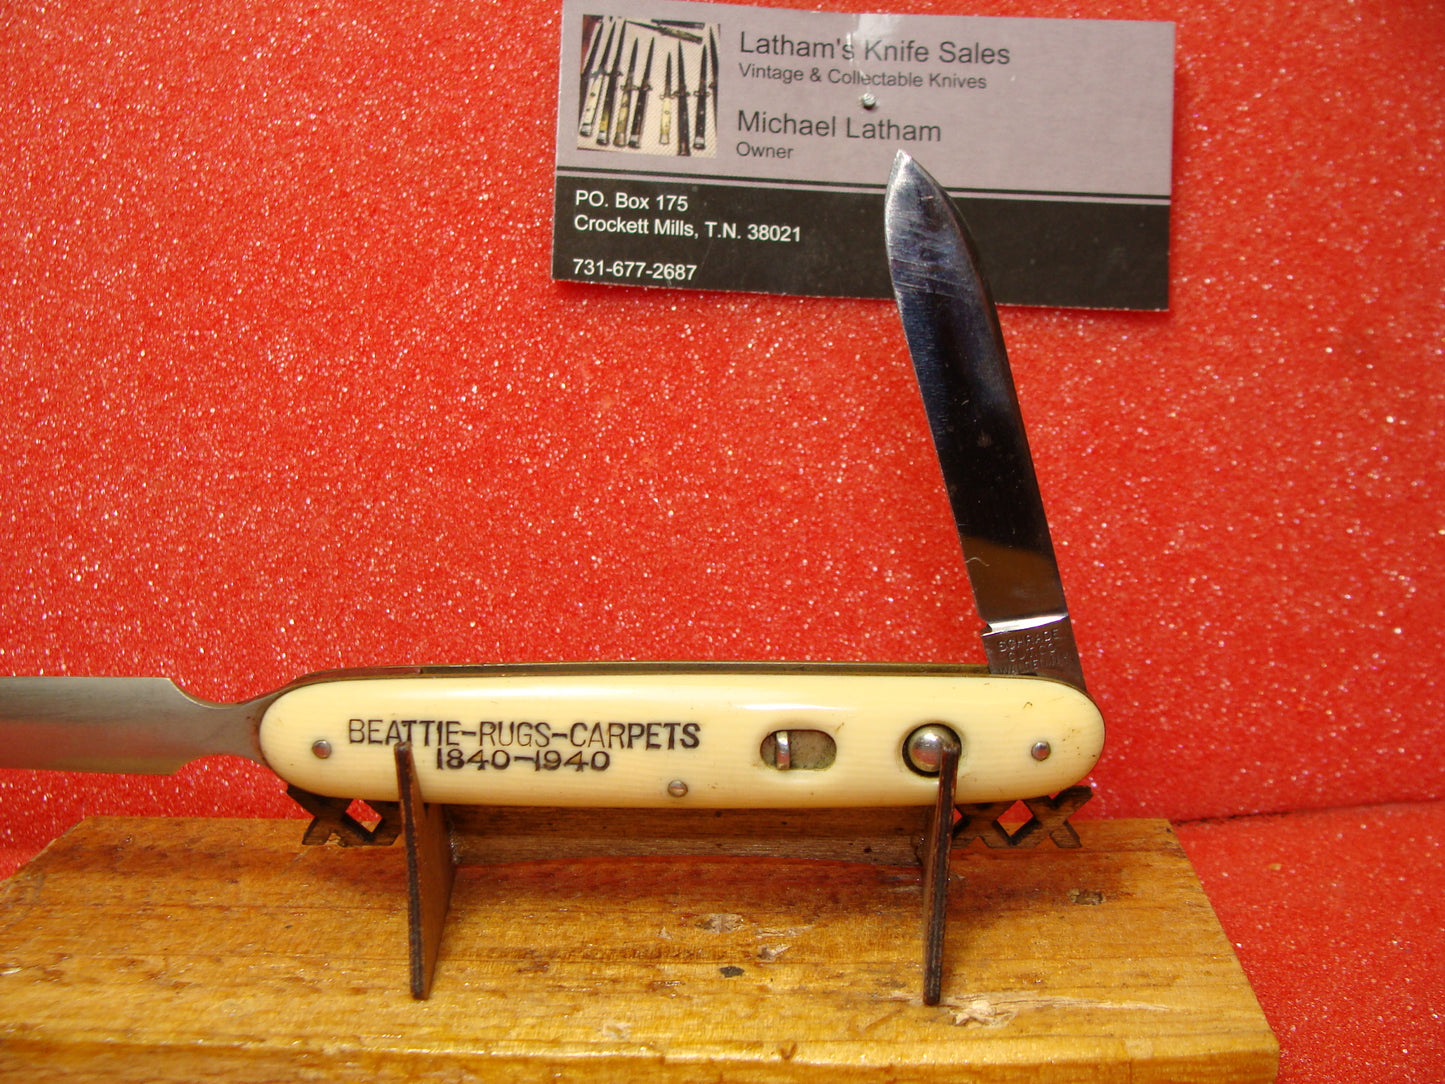 SCHRADE CUT CO. WALDEN NY 1916-46 VINTAGE AMERICAN AUTOMATIC KNIFE 3 3/8" SINGLE BLADE LETTER OPENER IMITATION IVORY CELLULOID HANDLES ETCHED BEATTIE-RUGS-CARPETS 1840-1940.